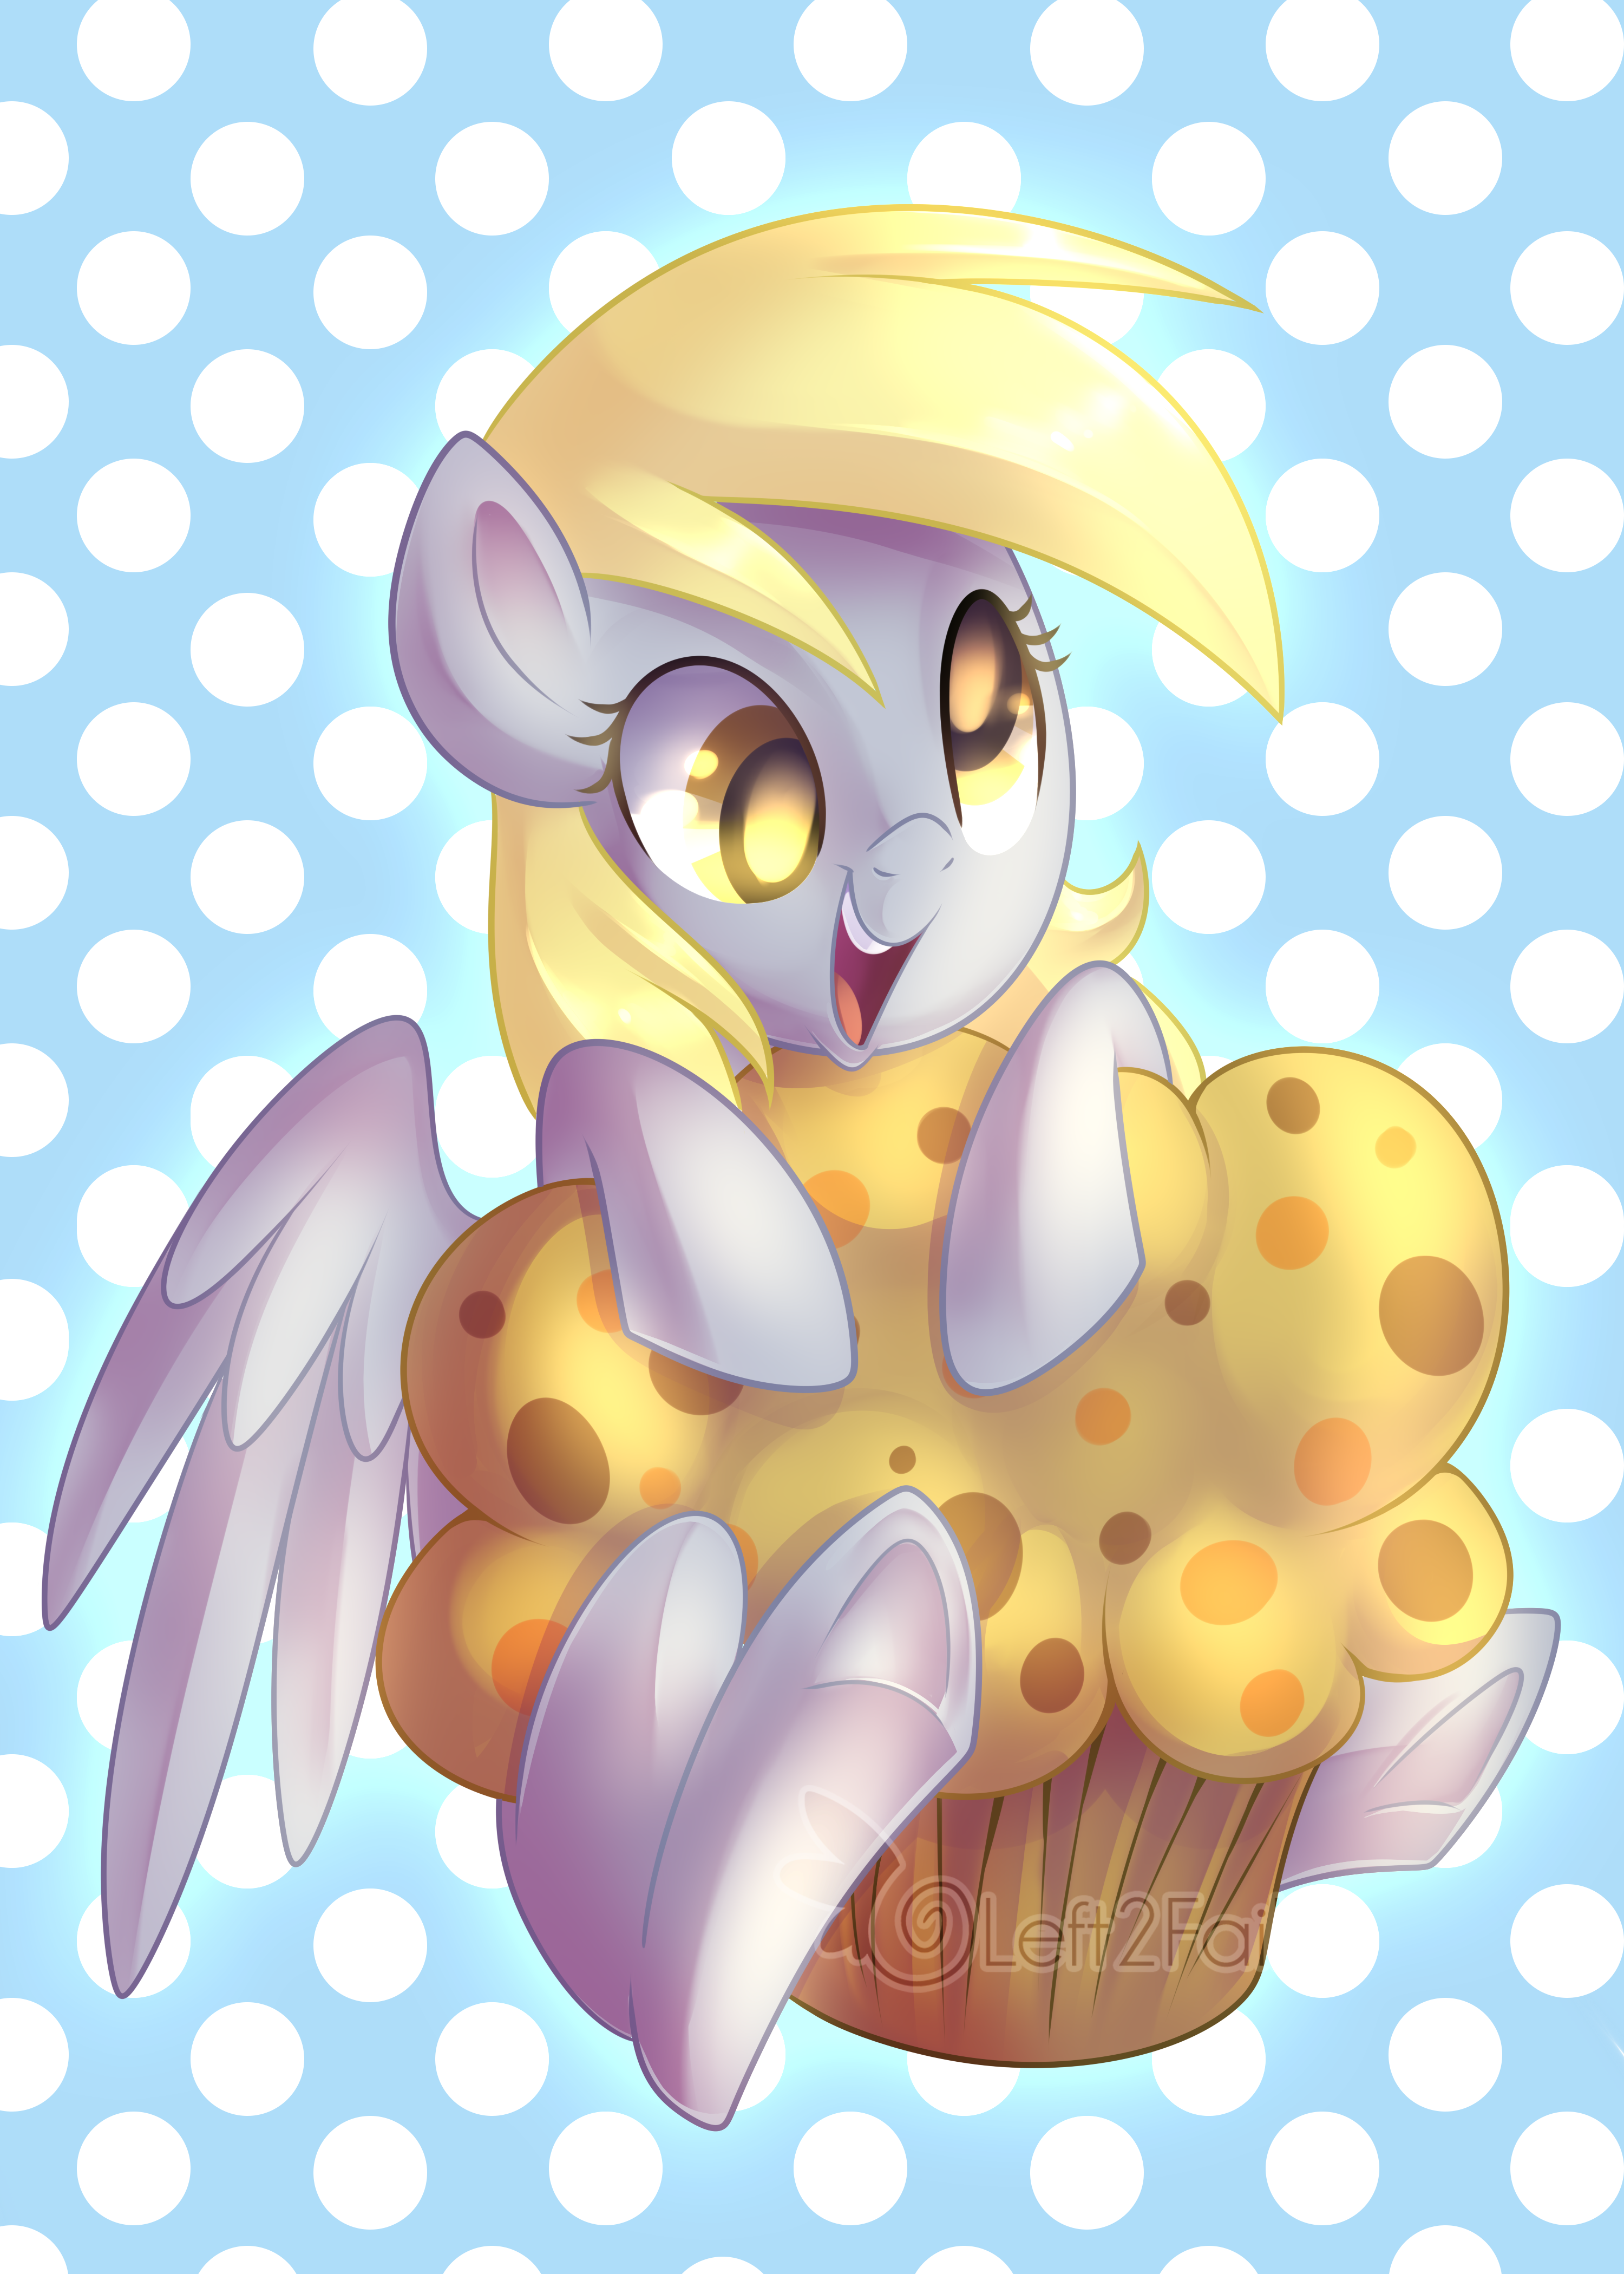 1396995__safe_artist-colon-left2fail_derpy+hooves_cute_food_happy_muffin_open+mouth_pegasus_polka+dots_pony_smiling_solo.png